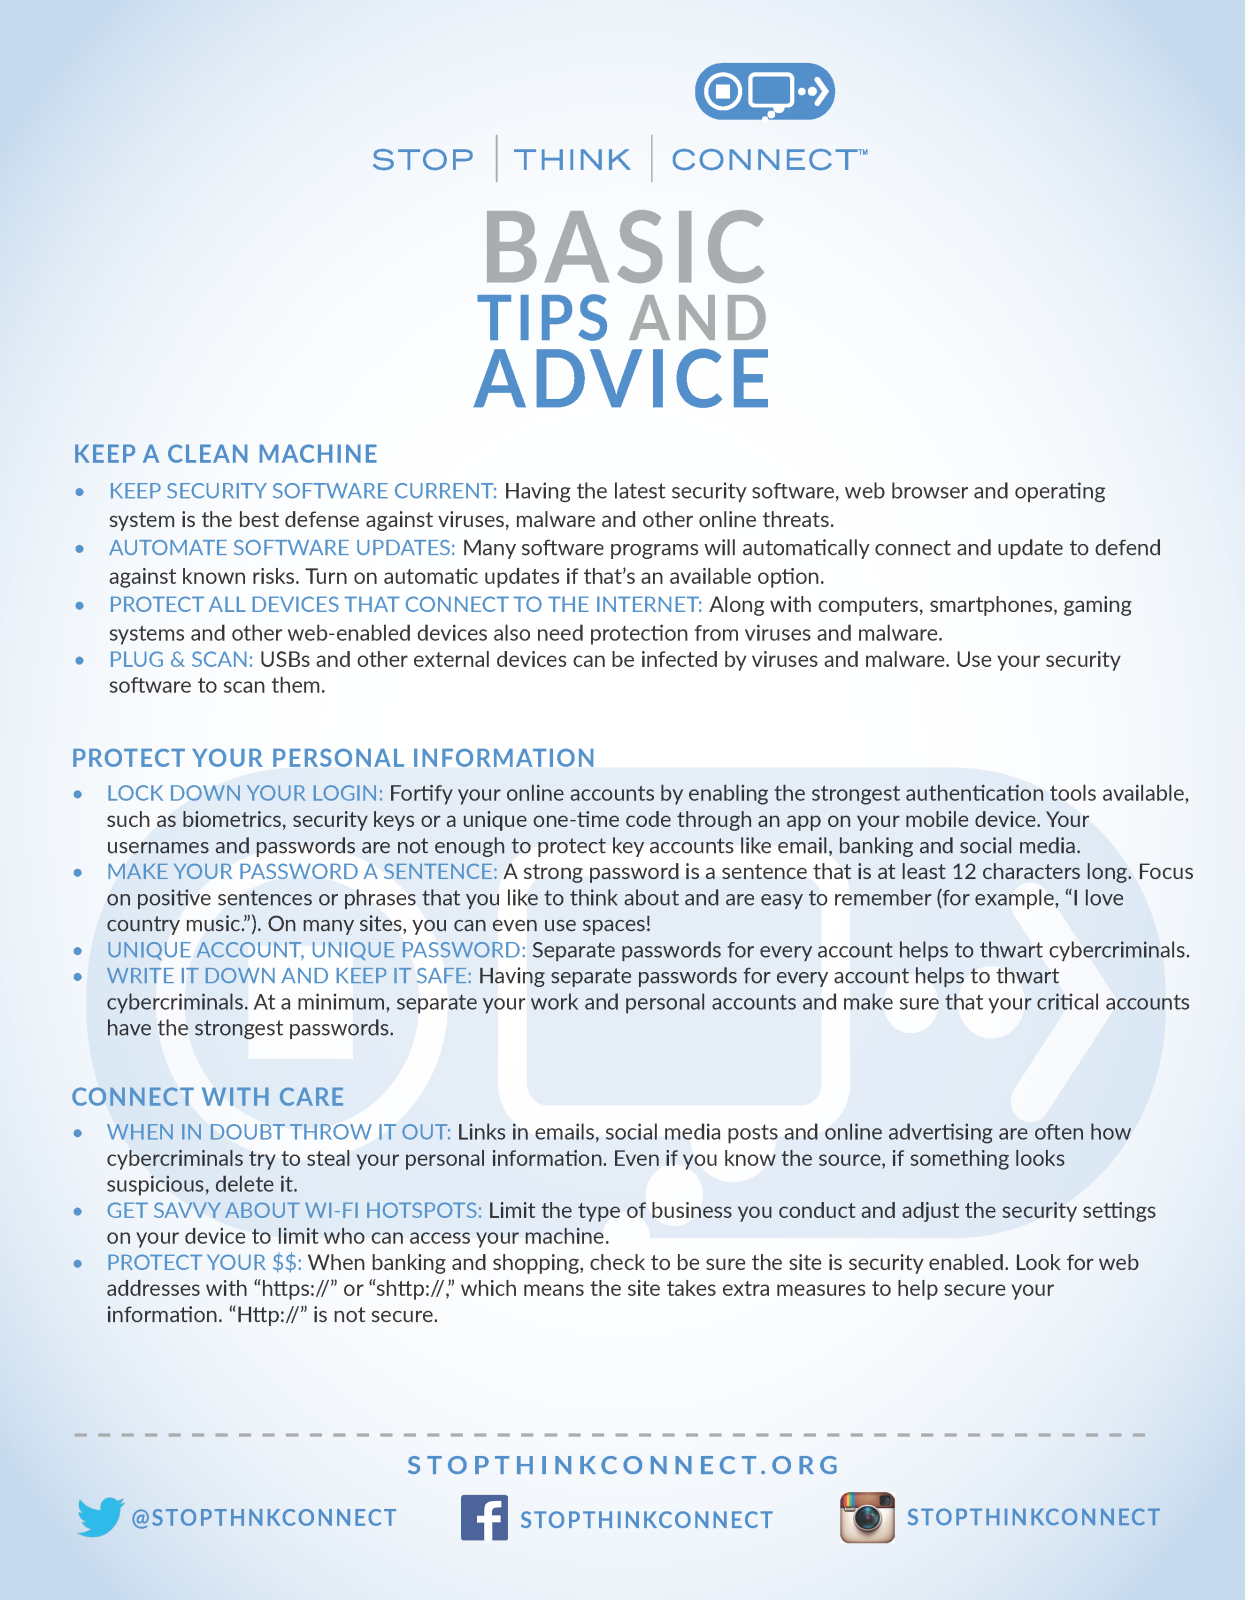 Basic Tips and Advice for Online Security, page 1